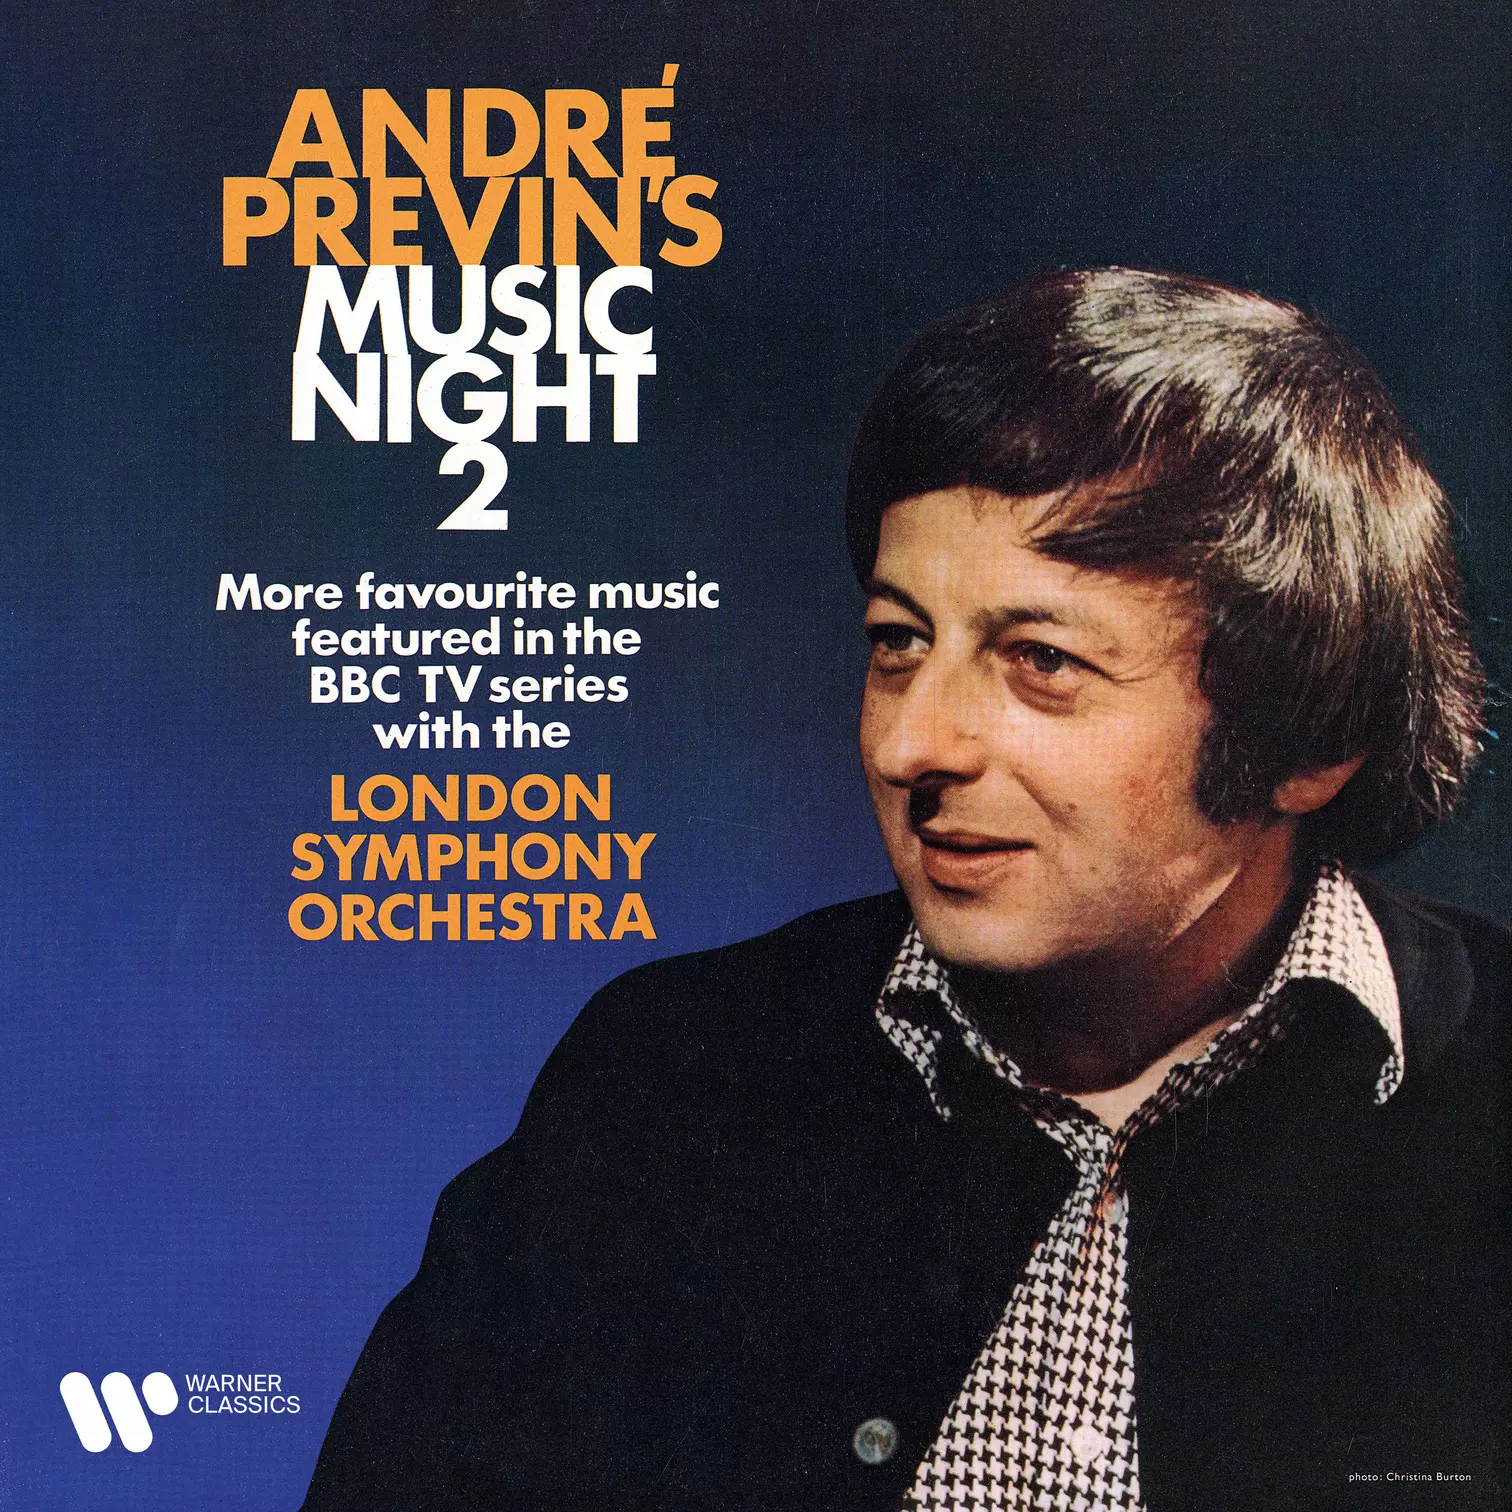 André Previn’s Music Night 2